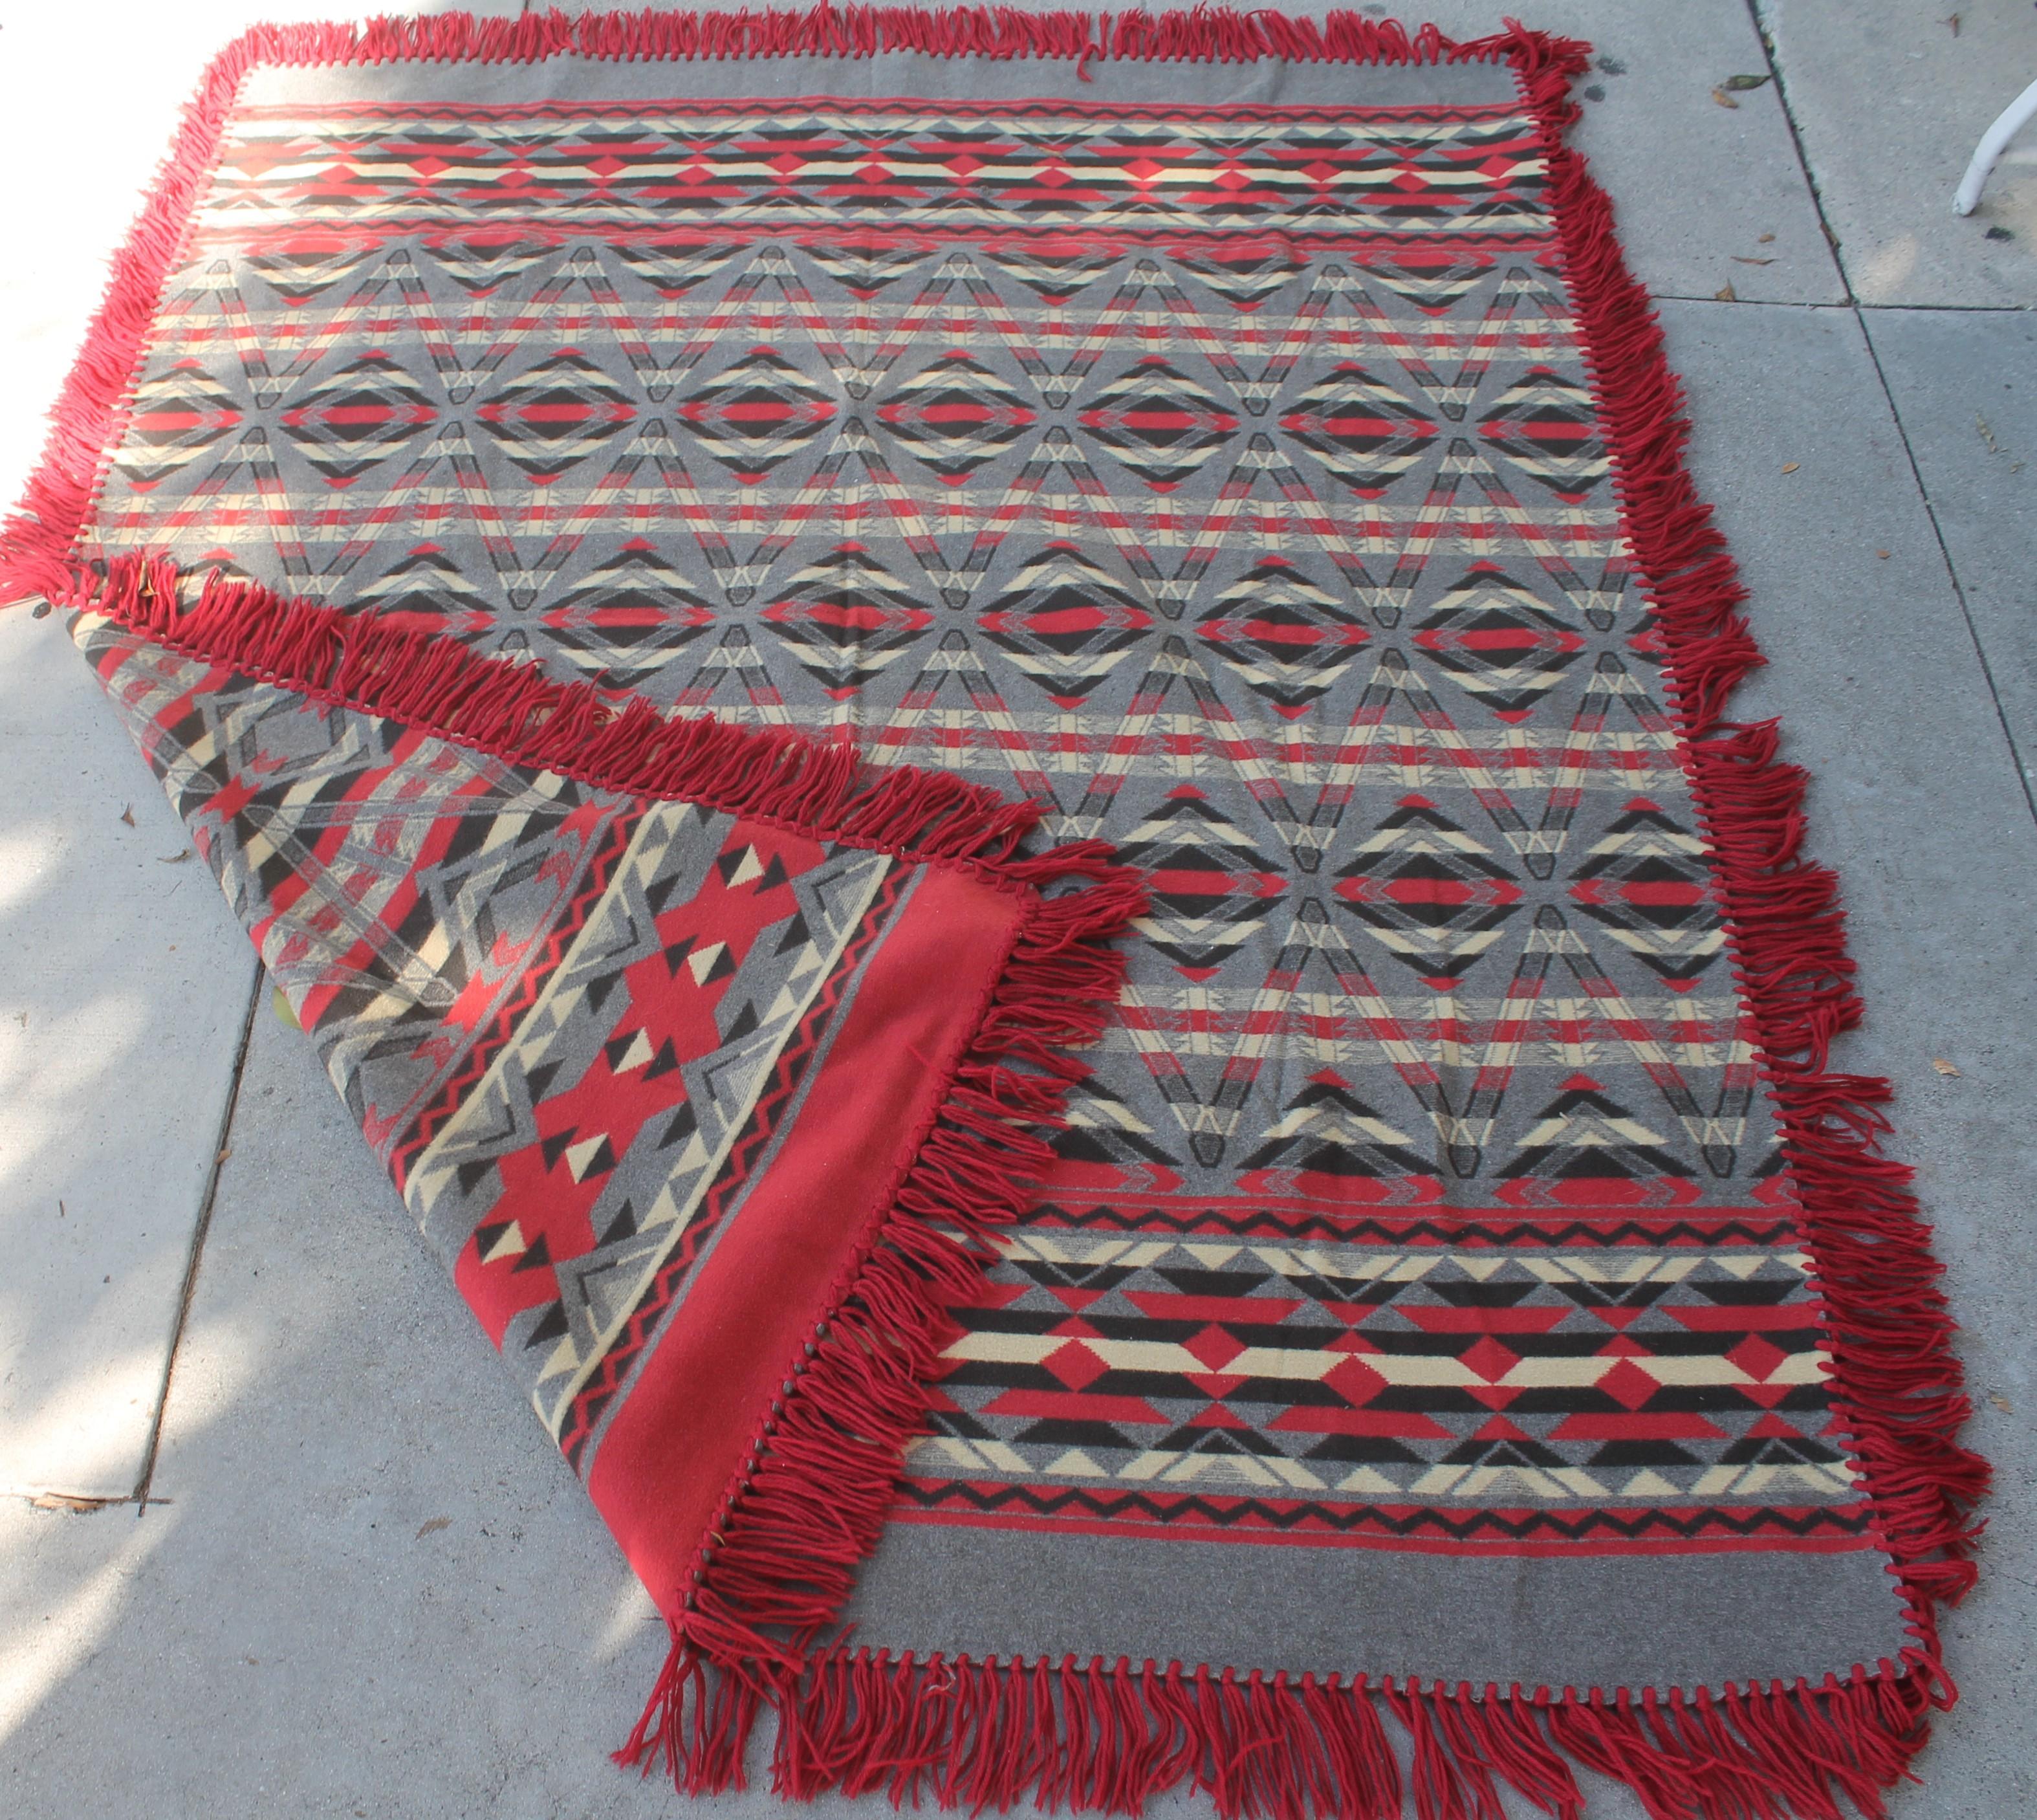 This early Beacon cotton Indian design camp blanket is in pristine condition. This was from a private collection and was never used. It retains the original fringe.